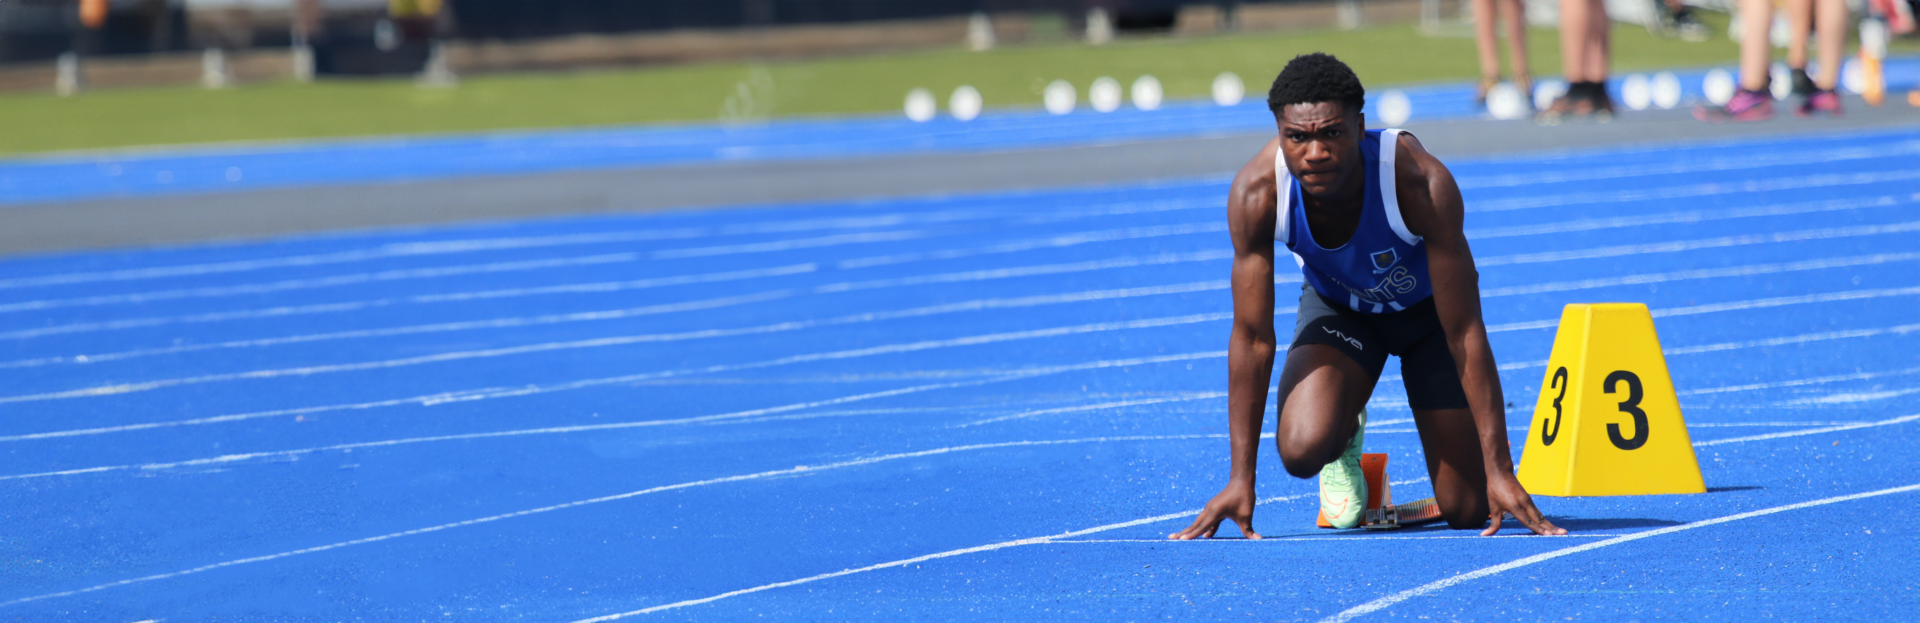 Student at the starting blocks of a athletics carnival